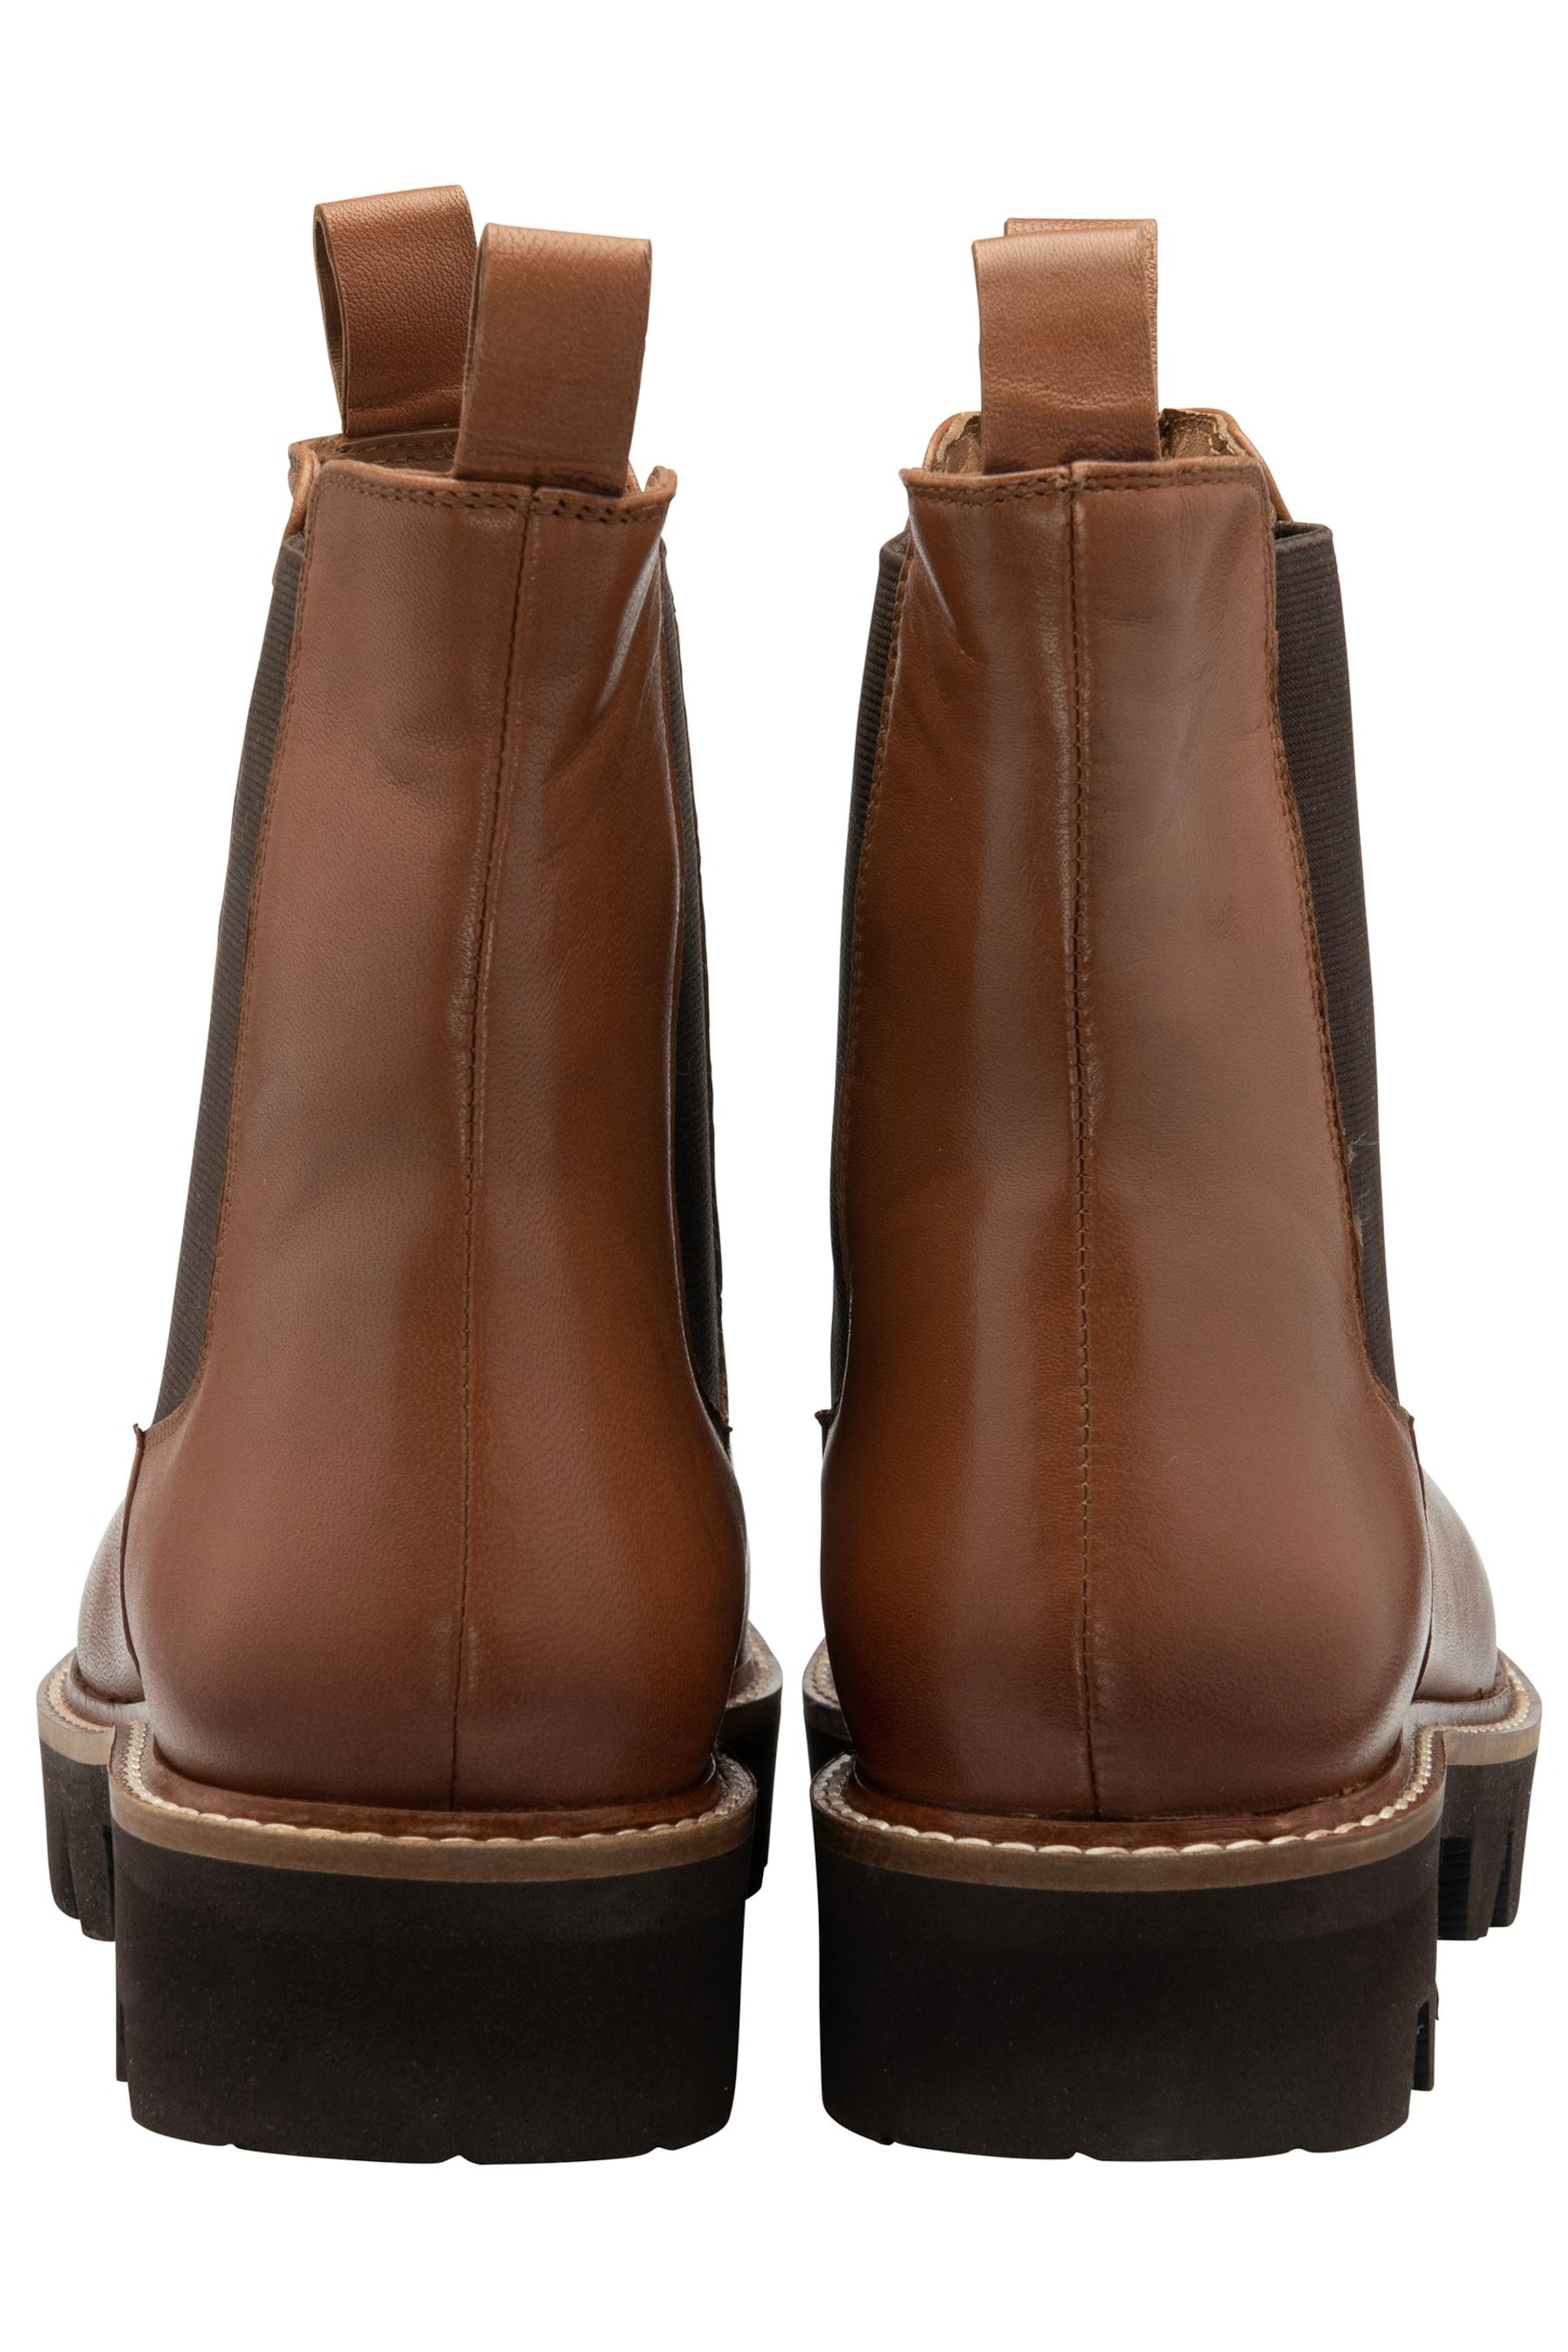 Ravel Brown Leather Cleated Sole Chelsea Ankle Boots - Image 3 of 4